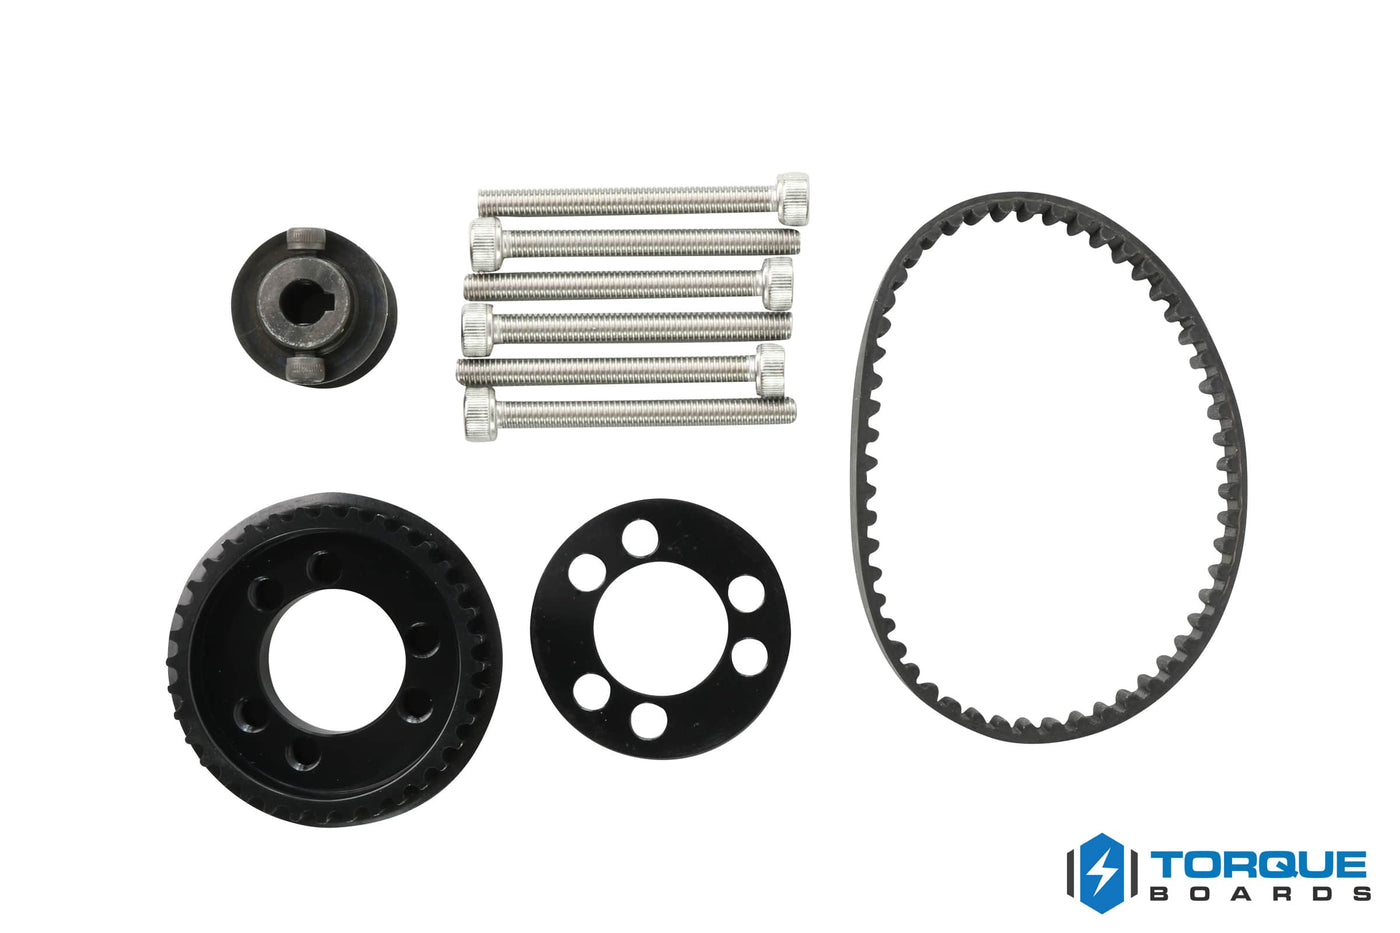 36T ABEC Pulley 15mm Combo Kit